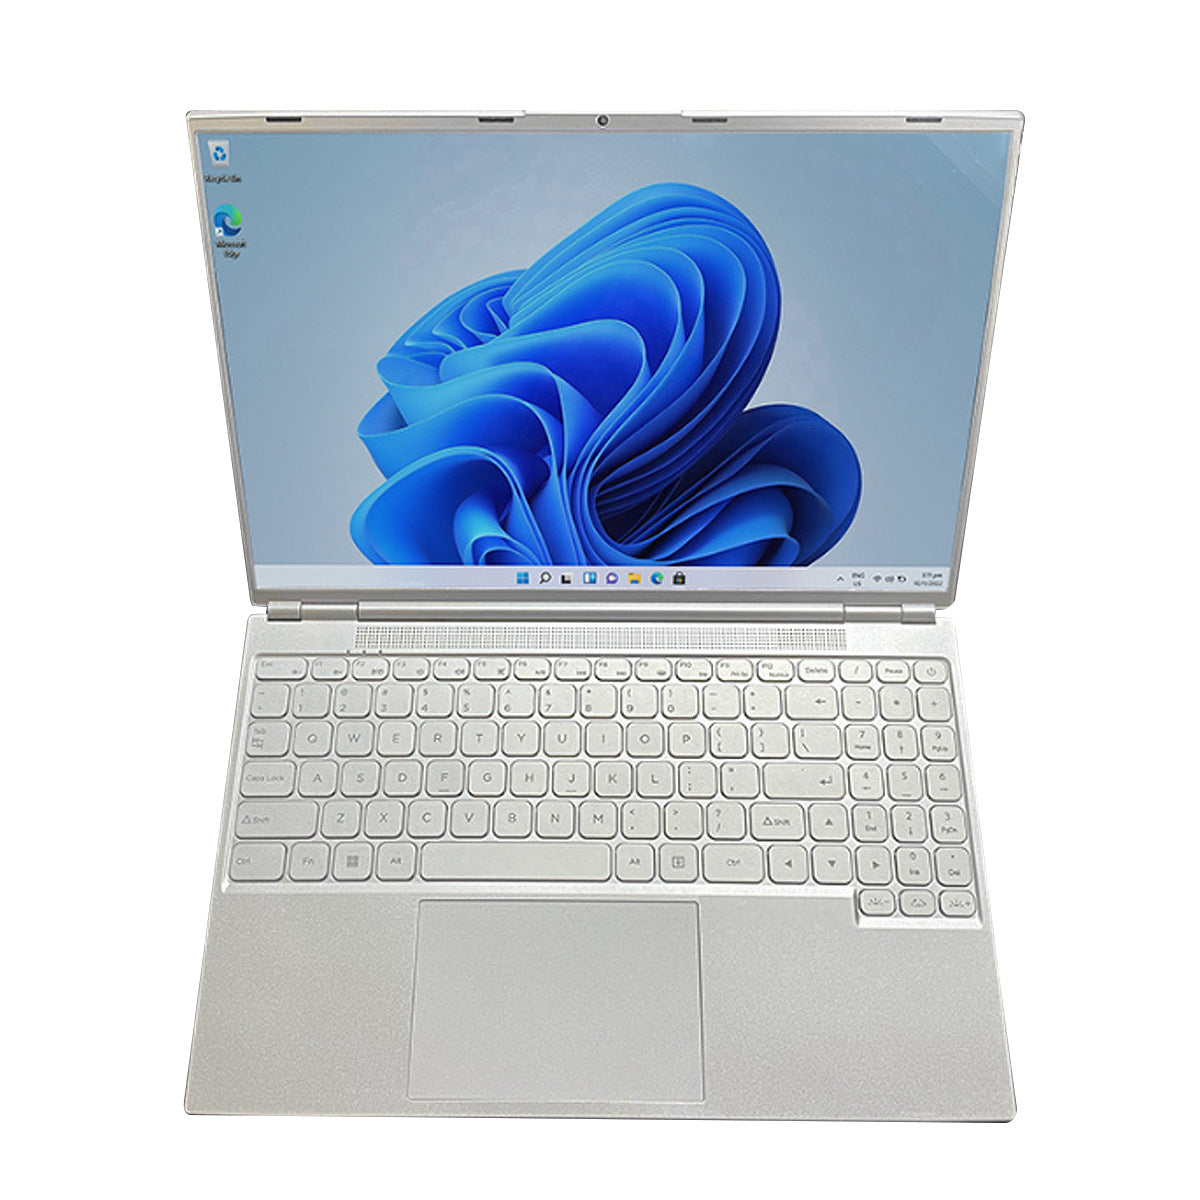 13 Generation Core I7 MX550 4G Single Display Lightweight Portable Business Design Office Notebook Game Book